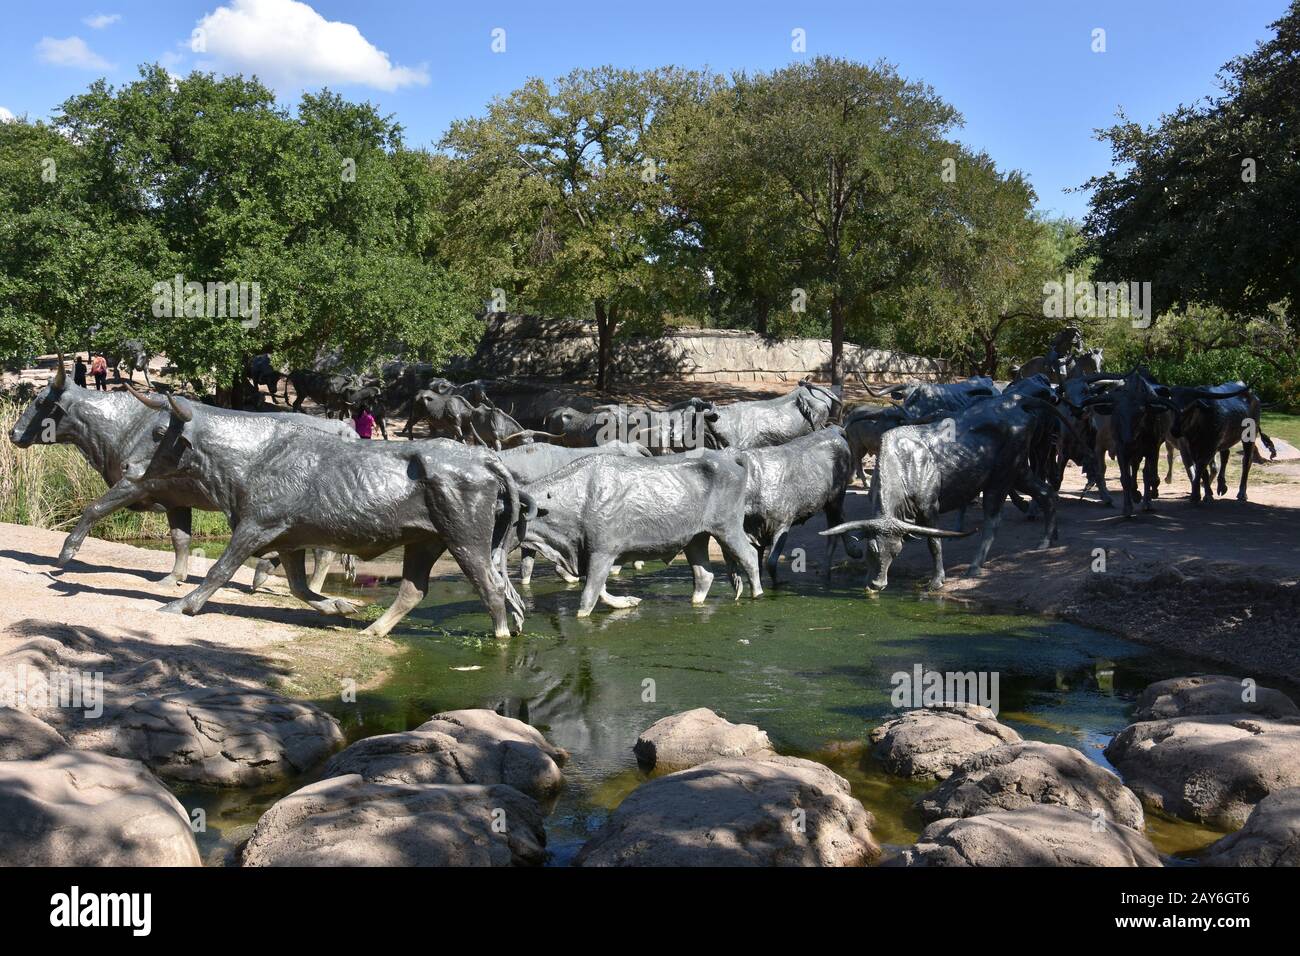 The Cattle Drive Sculpture at Pioneer Plaza in Dallas, Texas Stock Photo